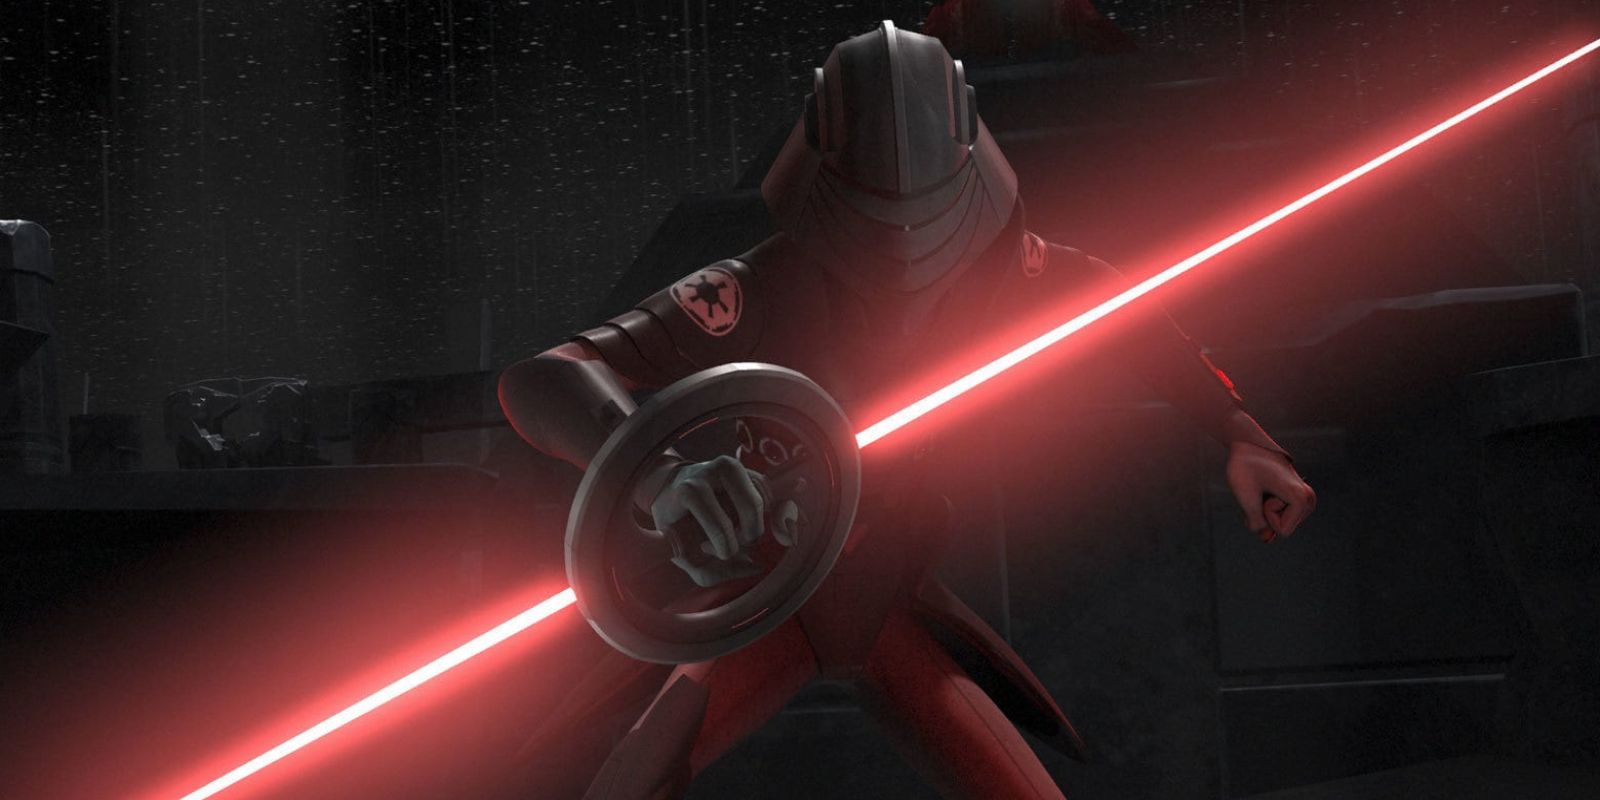 The Inquisitor Eighth Brother holds a double-bladed lightsaber, ready for Battle in Star Wars Rebels.